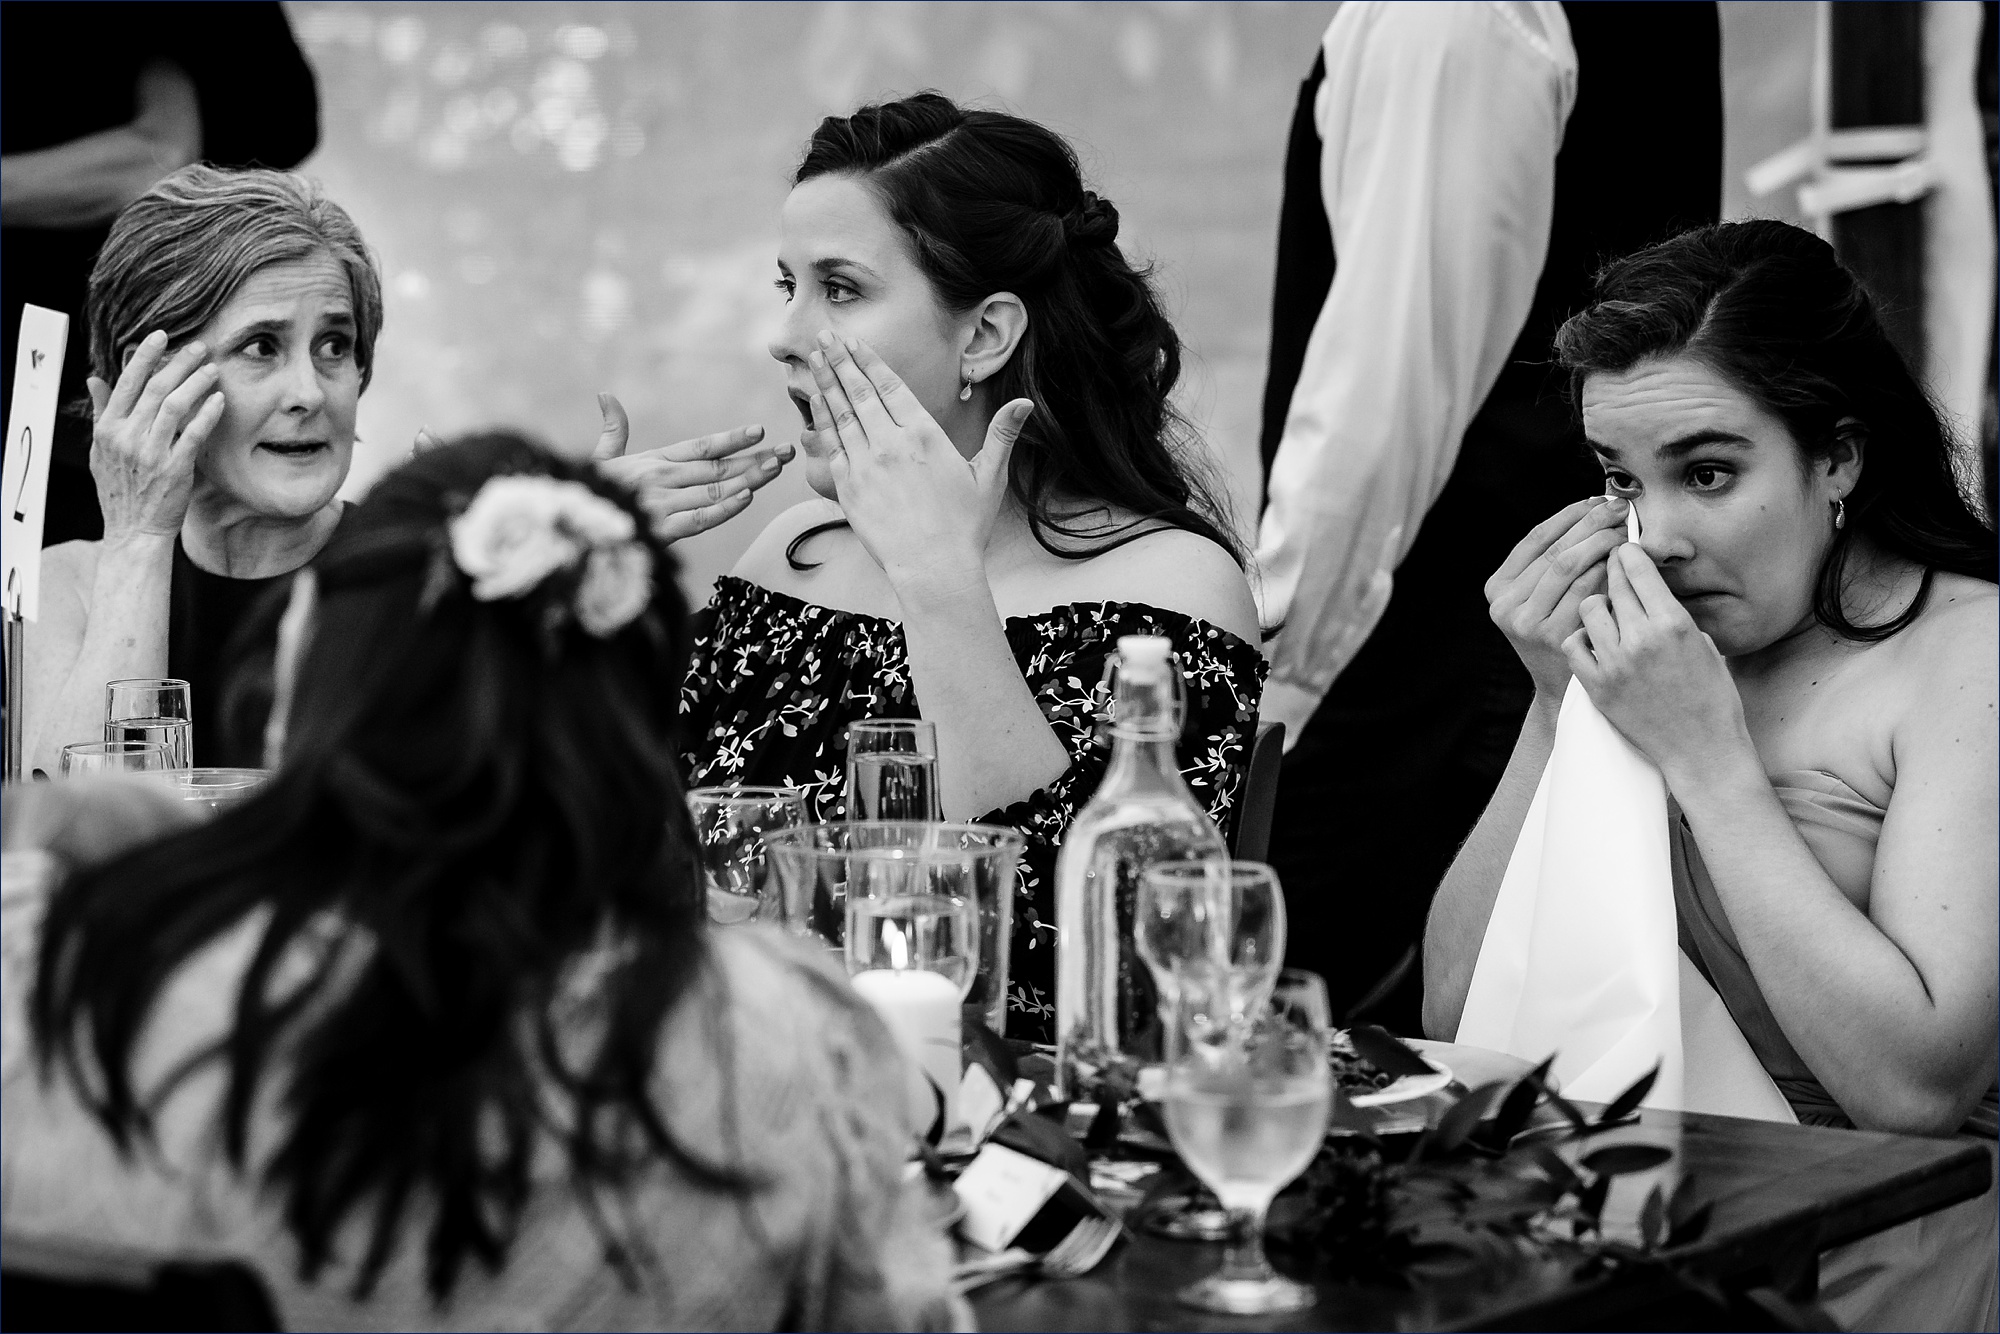 The bridesmaids and the mother of the bride tear up at the toasts during the wedding reception at Hardy Farm in Maine